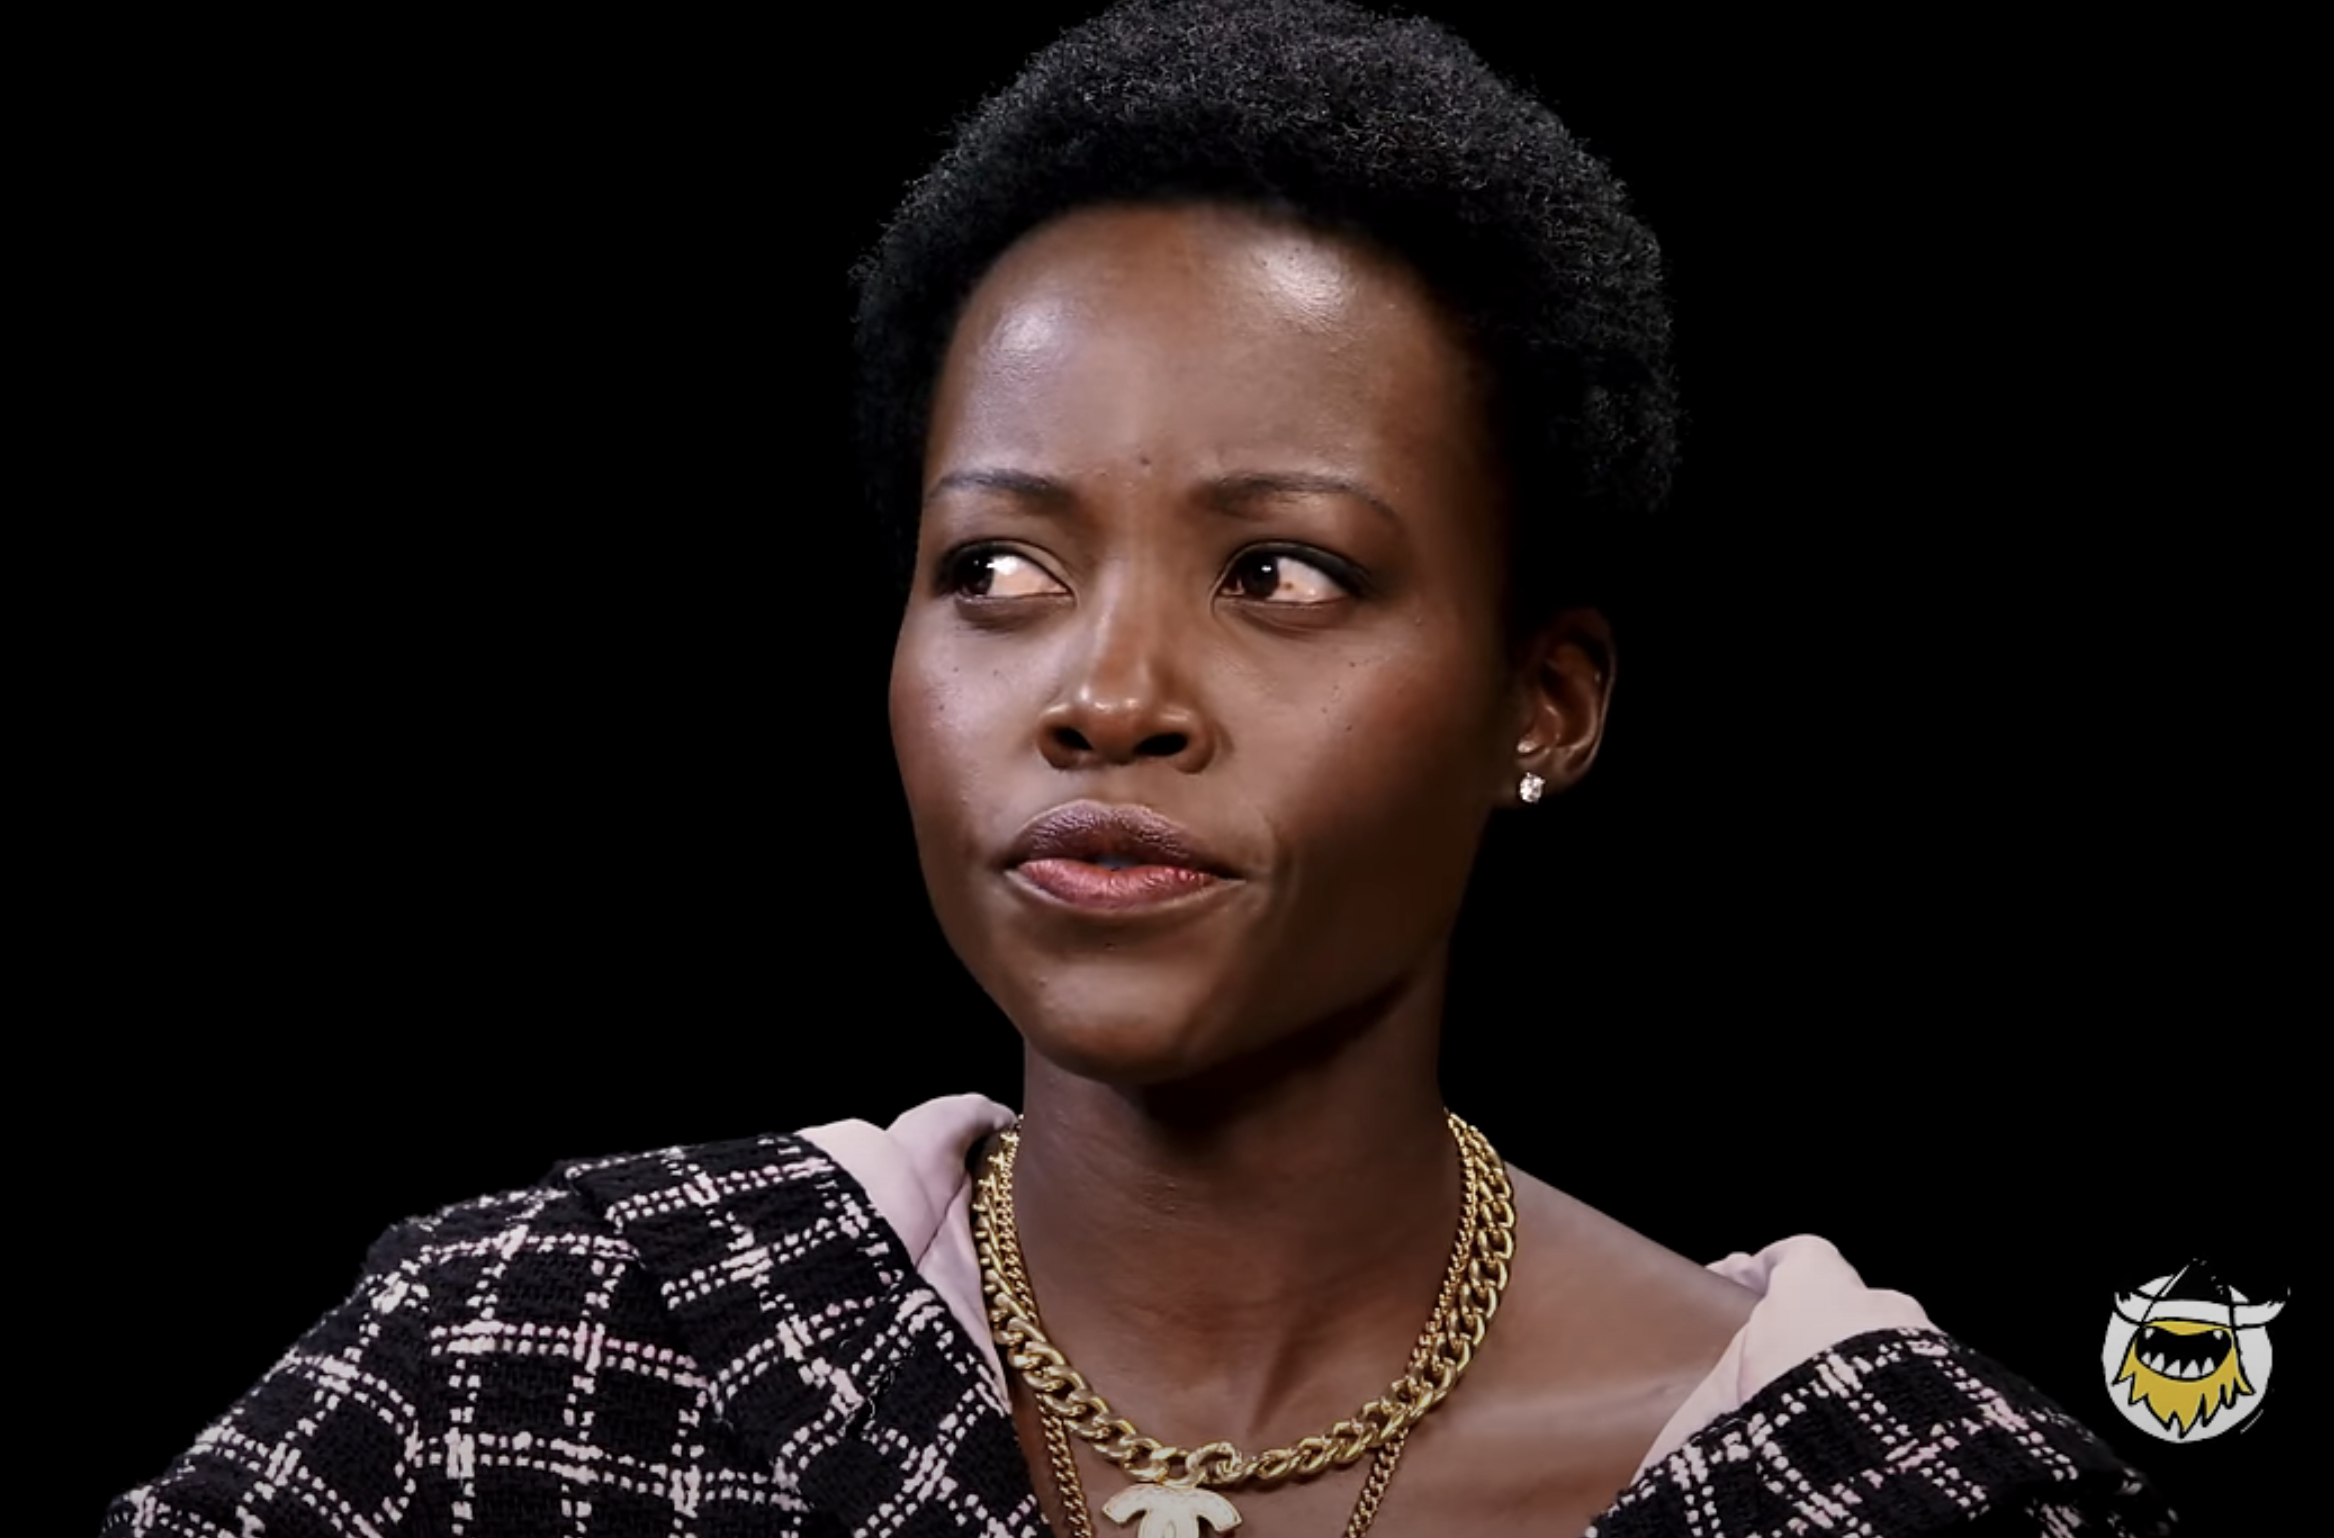 Lupita Nyong&#x27;o wearing a Chanel outfit and a gold Chanel necklace appears on the show &quot;Hot Ones&quot; with a Skeptical expression